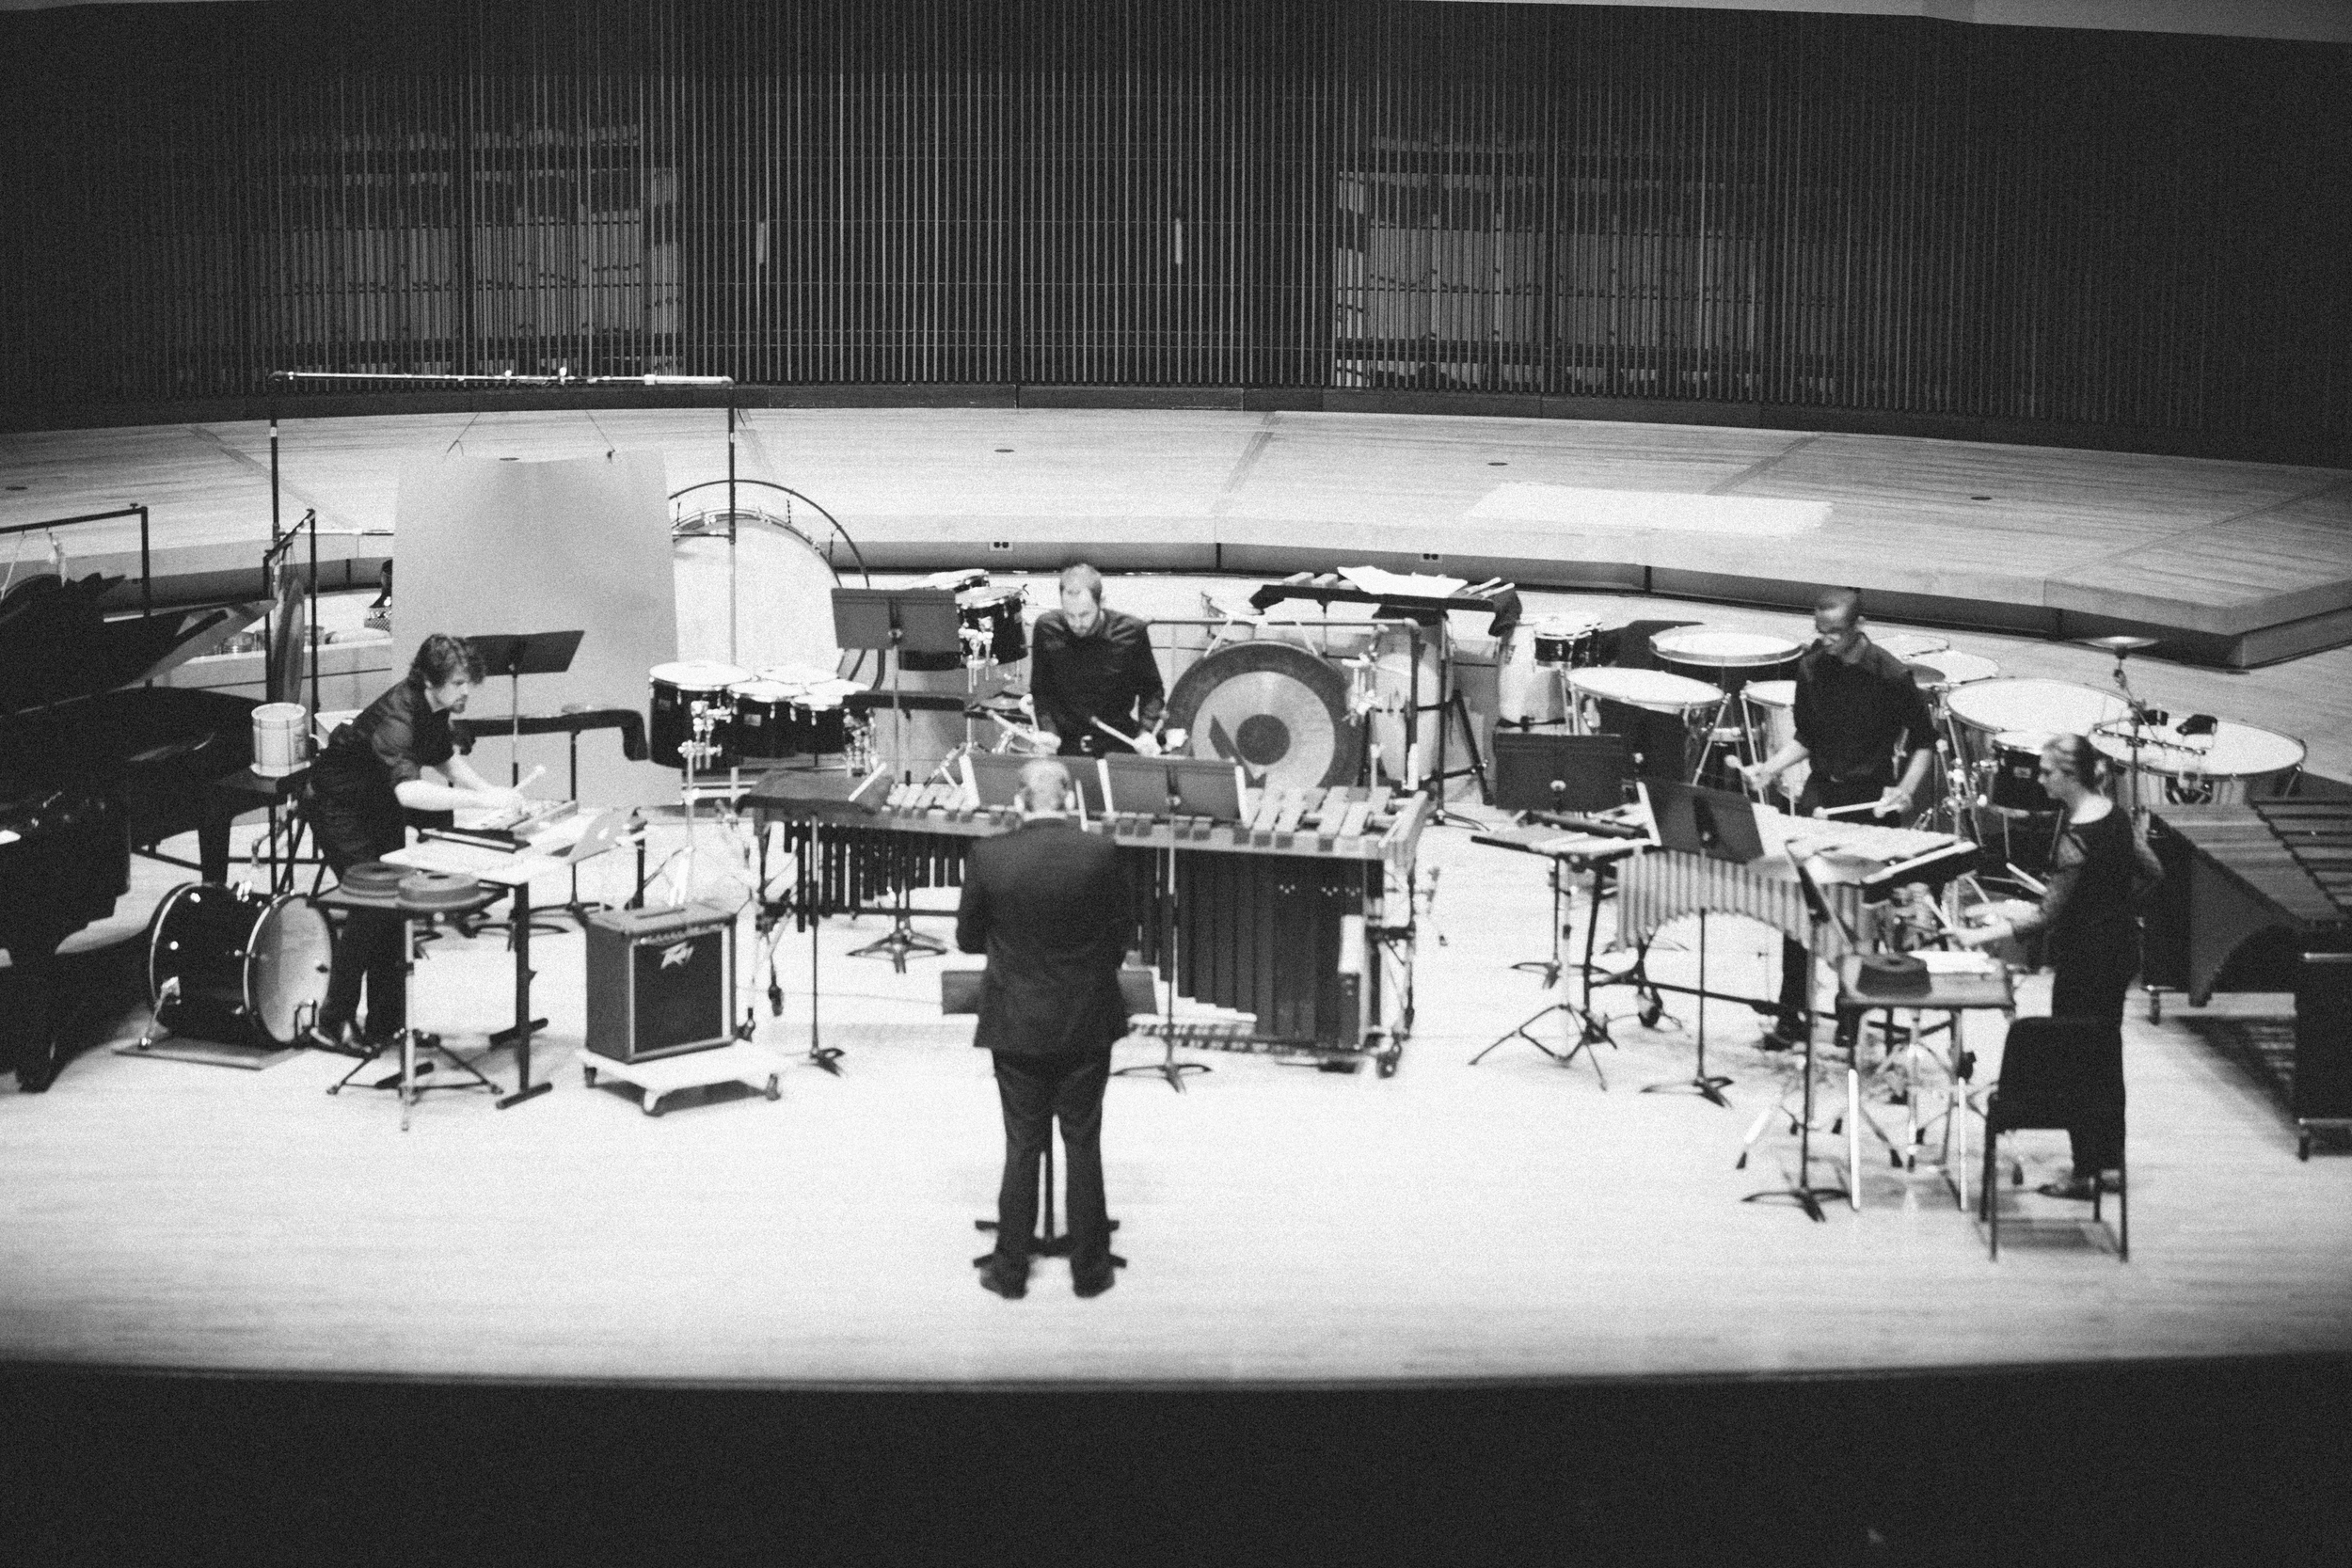 Directing the University of Maryland Percussion Ensemble